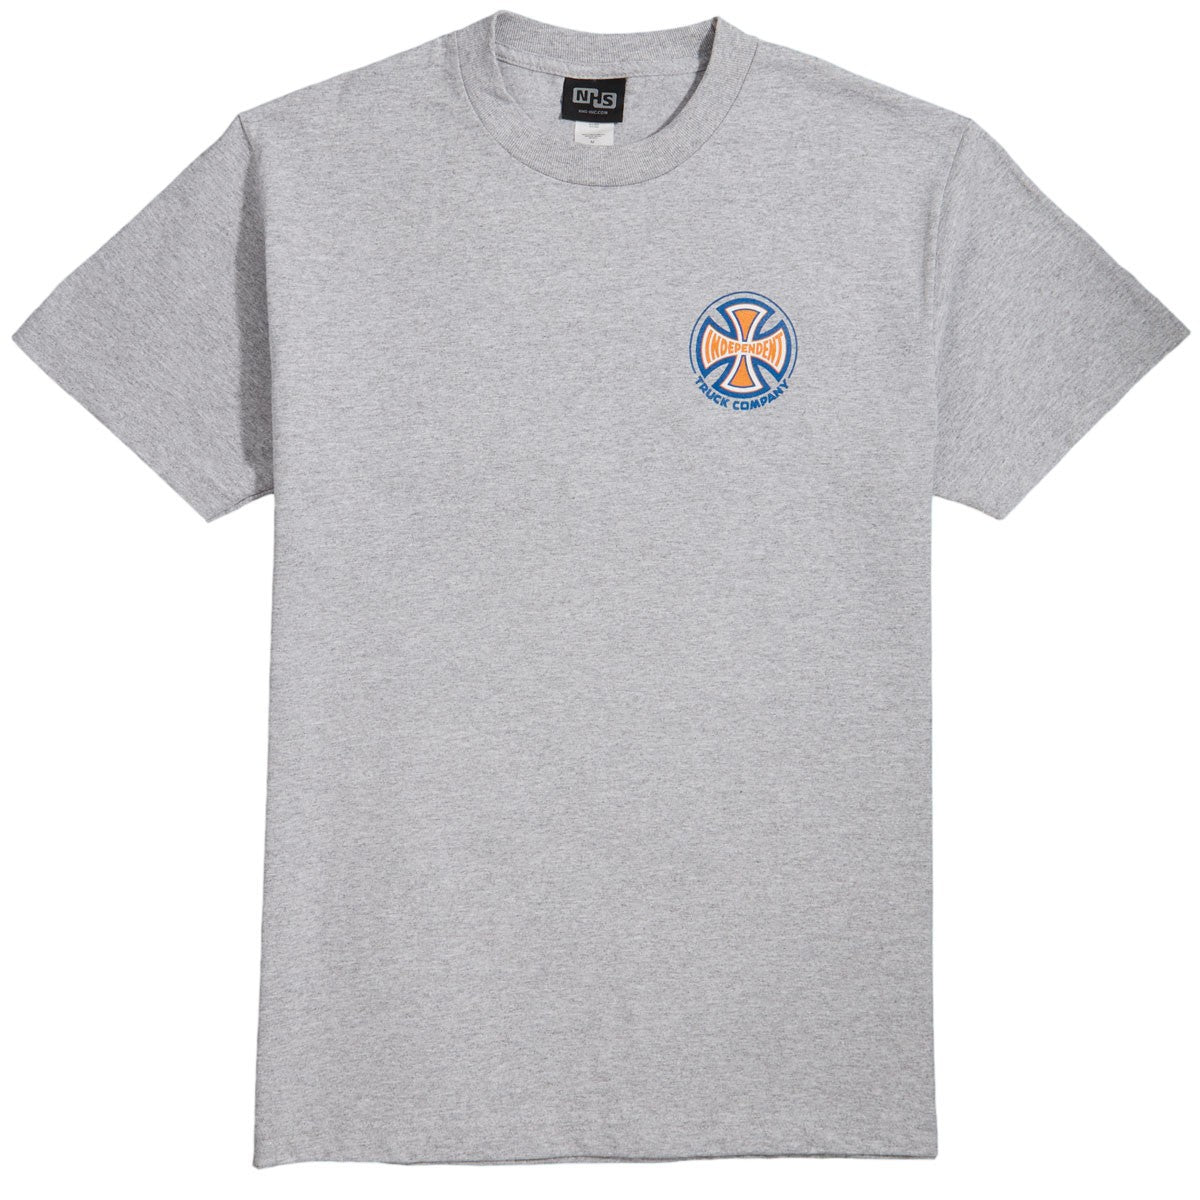 INDEPENDENT T-SHIRT SPECTRUM TRUCK CO. ATHETIC HEATHER - The Drive Skateshop